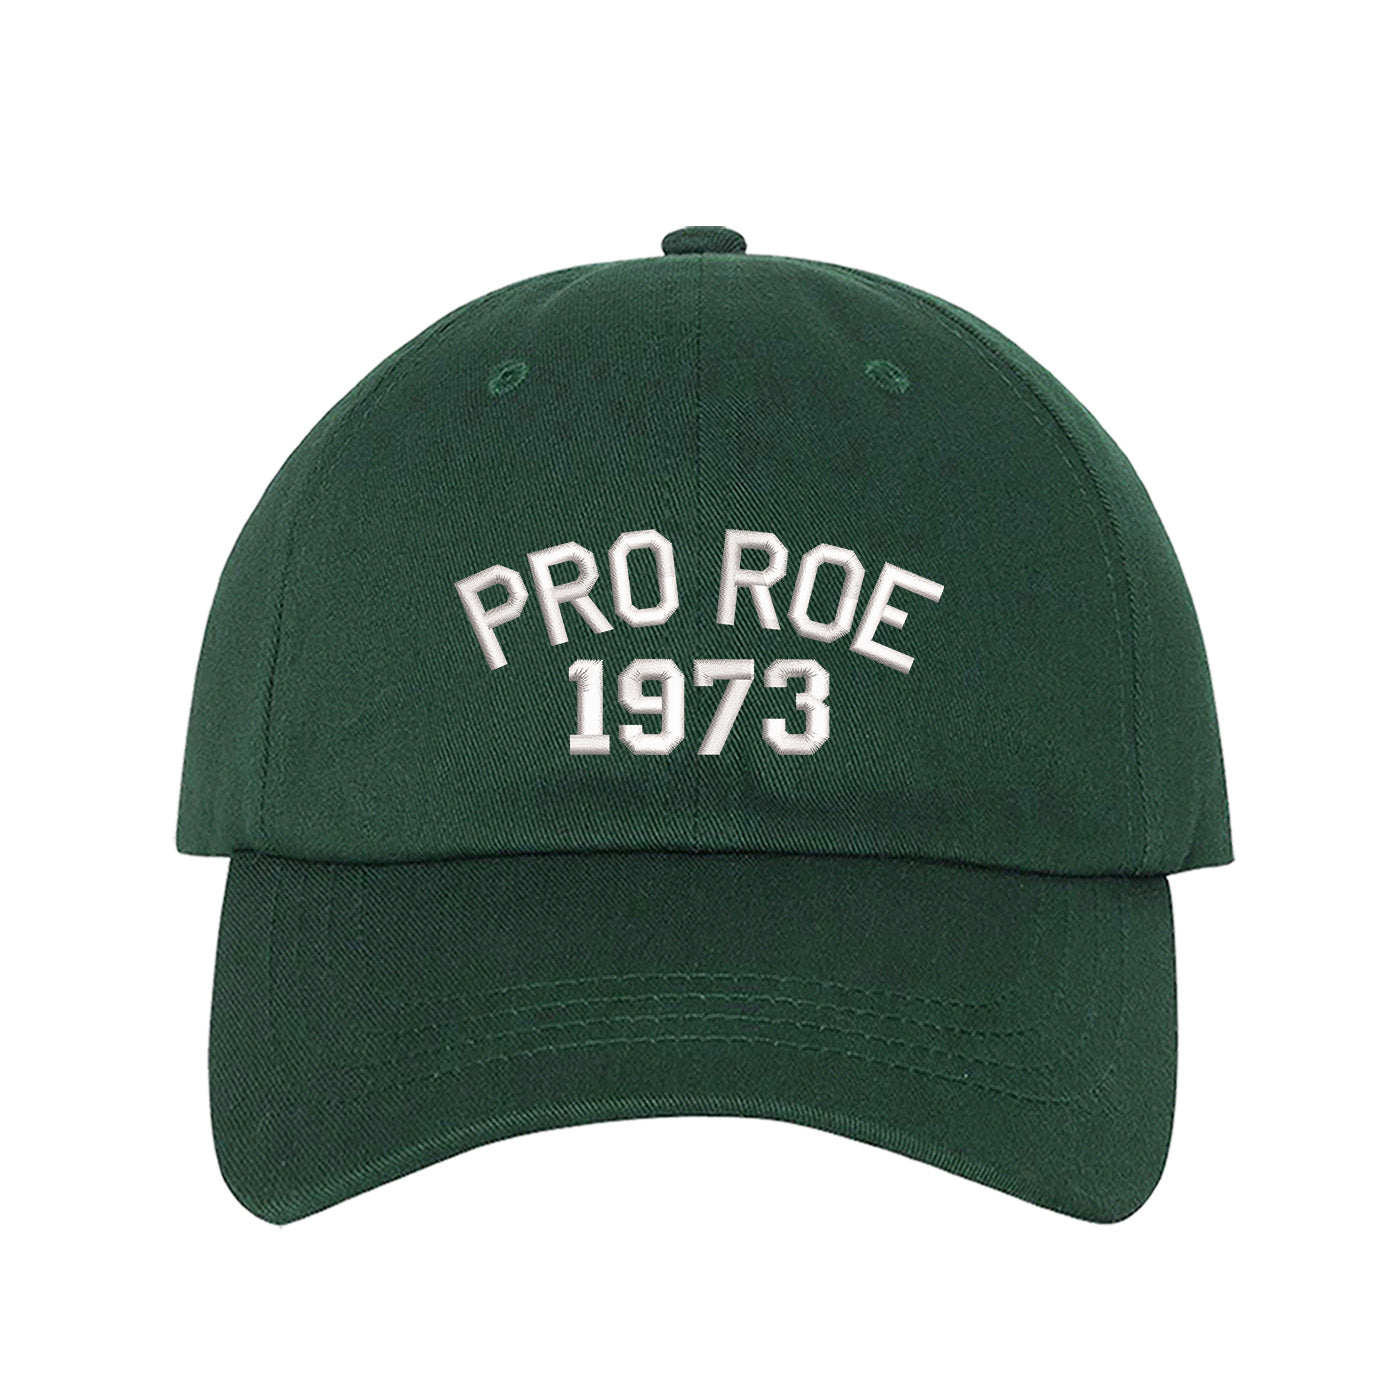 Pro Roe 1973 Forest Green Embroidered Baseball Cap - DSY Lifesetyle